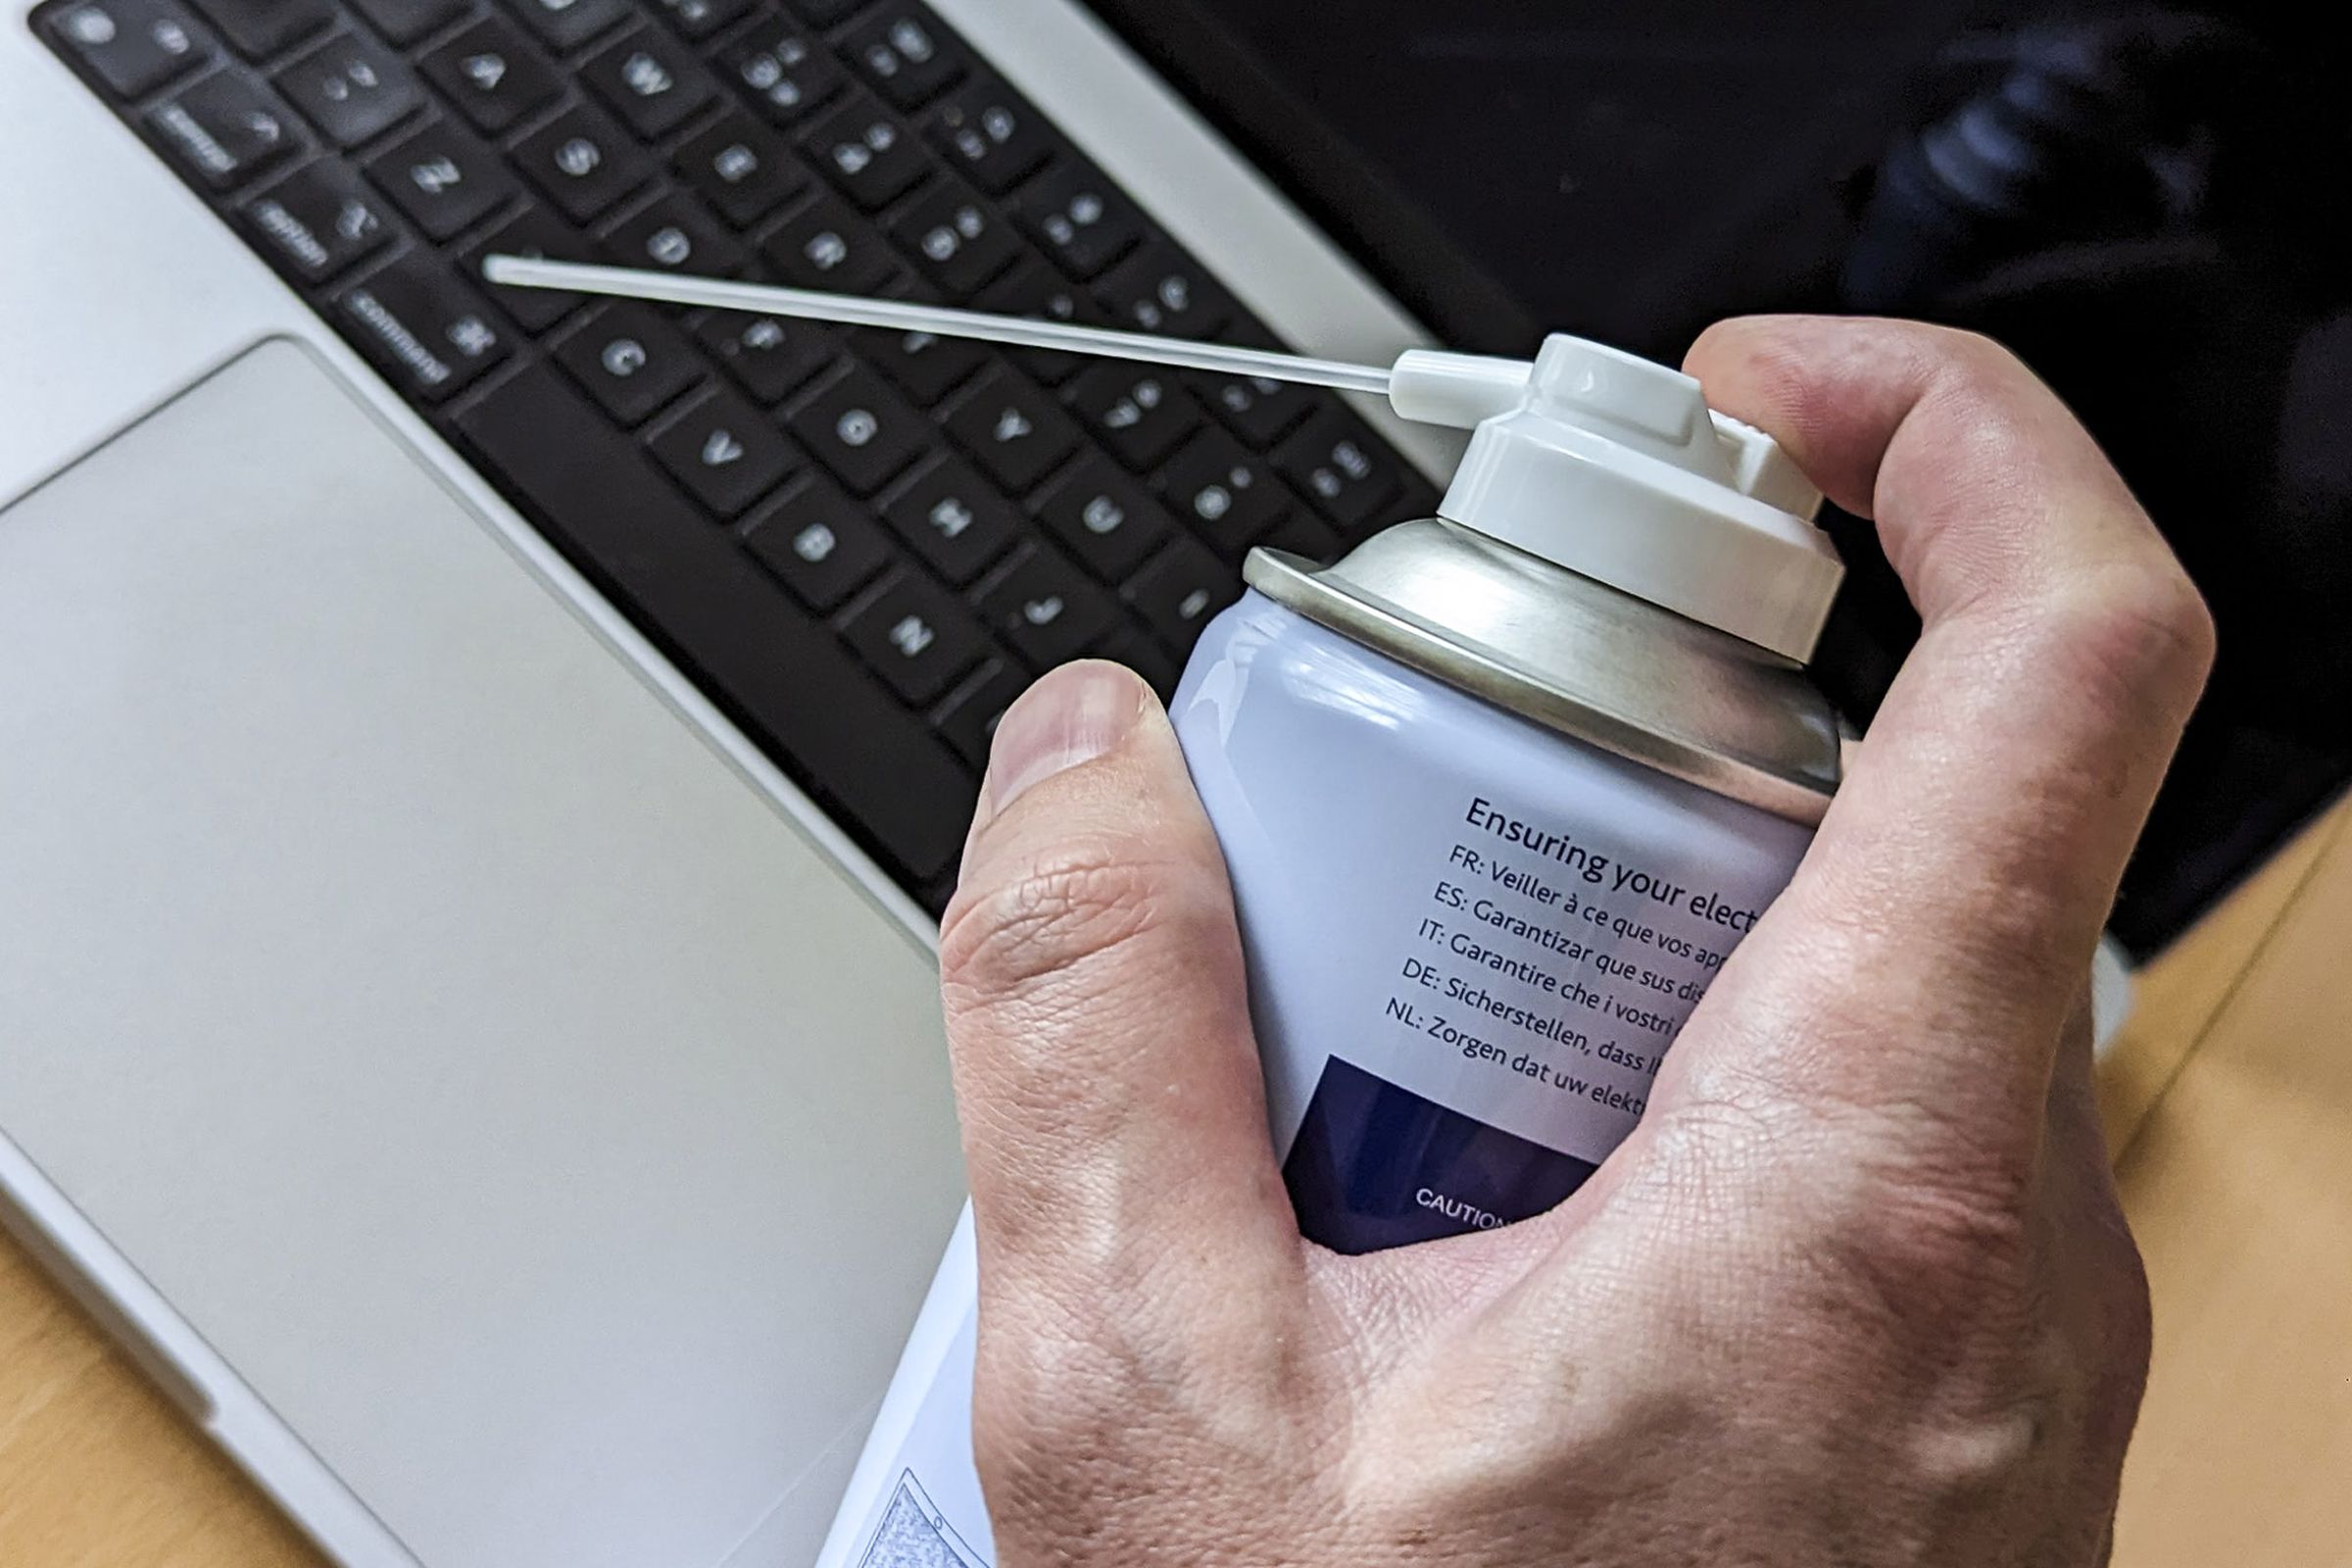 A hand holding a can of compressed air blowing into a laptop keyboard.